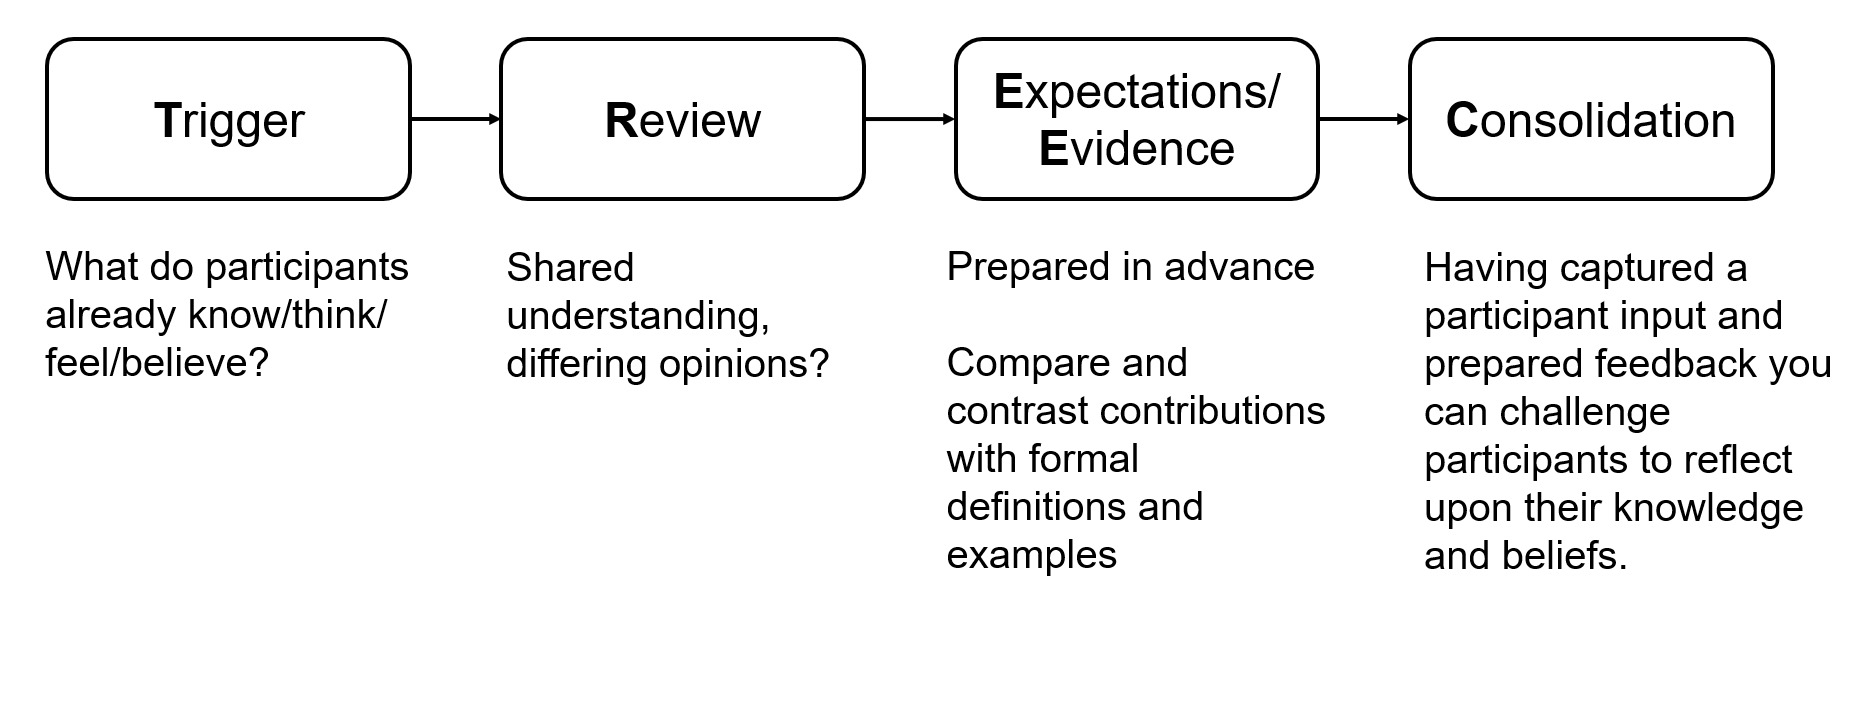 TREC model in 4 stages Trigger, Review, Expectations/Evidence and Consolidation. Full description in the main text.